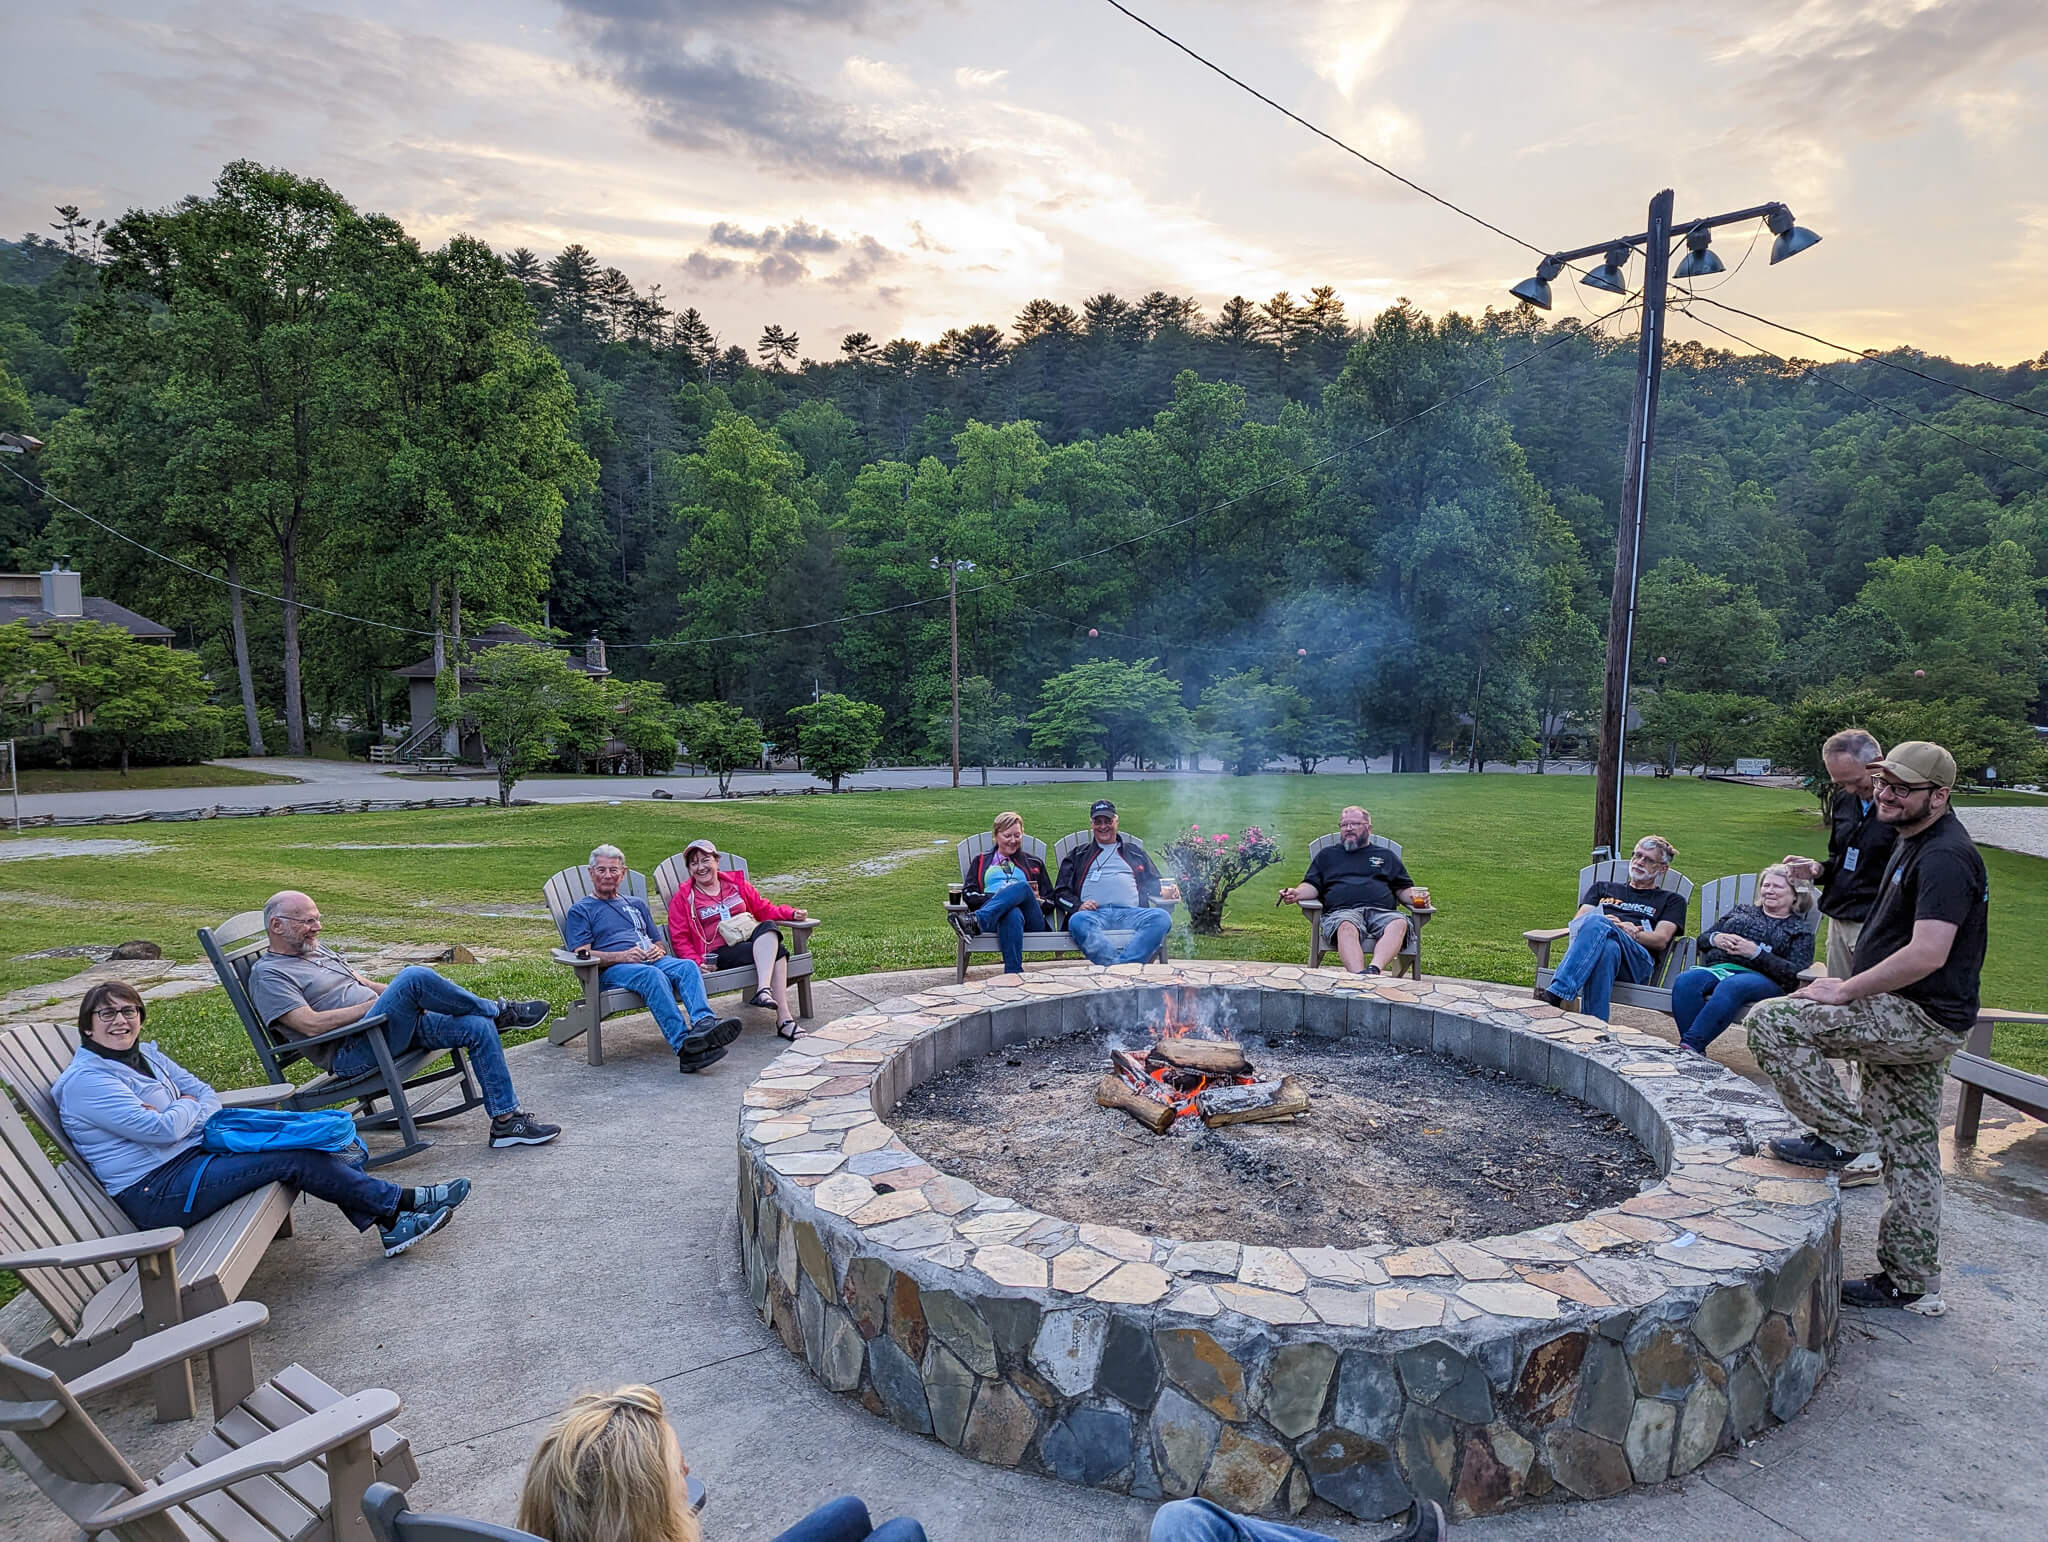 A group of riders sitting around a fire pit with trees in background